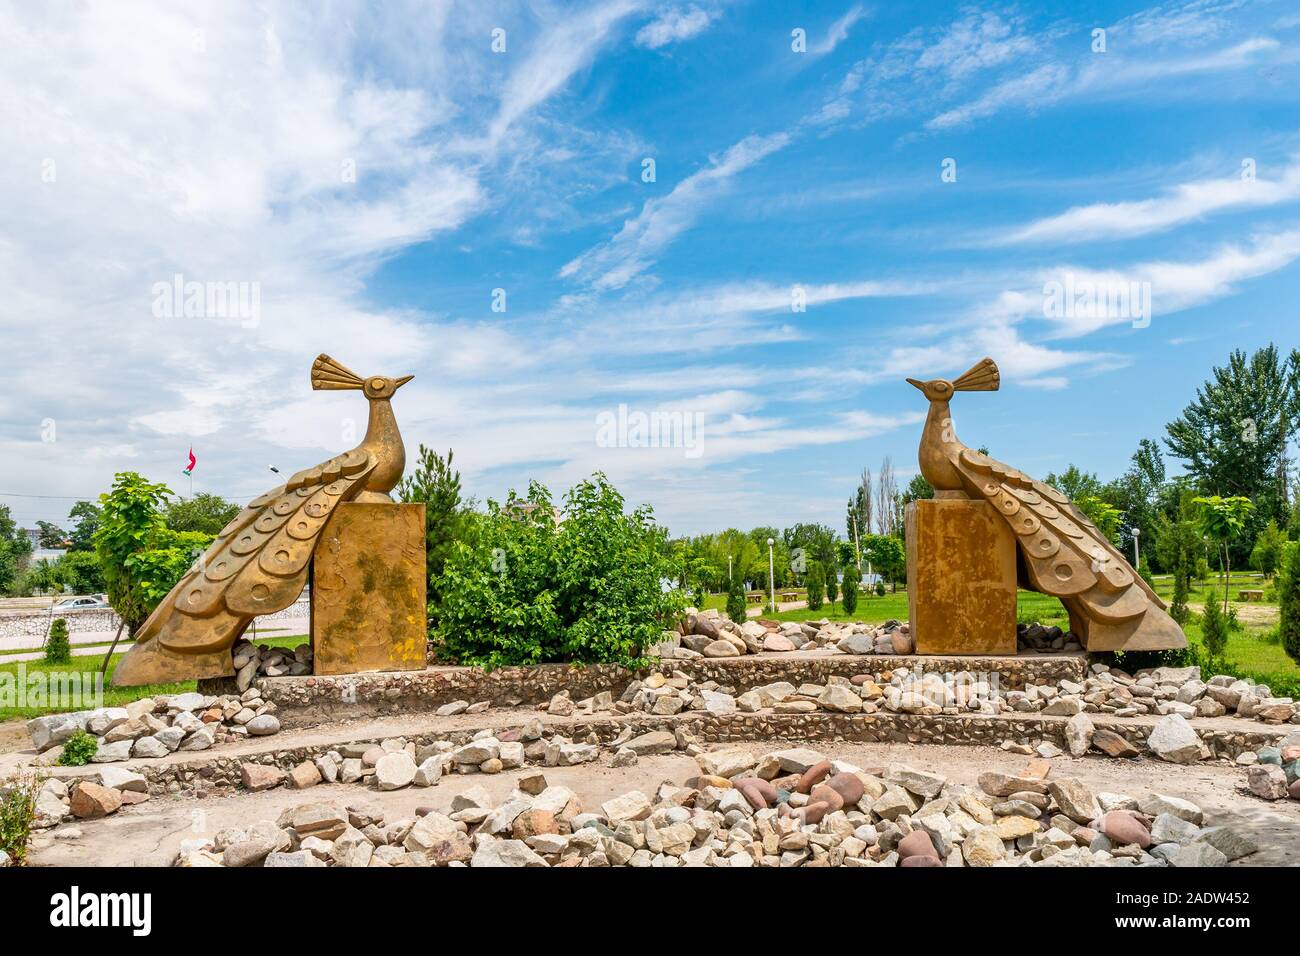 Dushanbe Concert Complex Kokhi Borbad Picturesque View of Two Peacock Statues at Park on a Cloudy Rainy Day Stock Photo